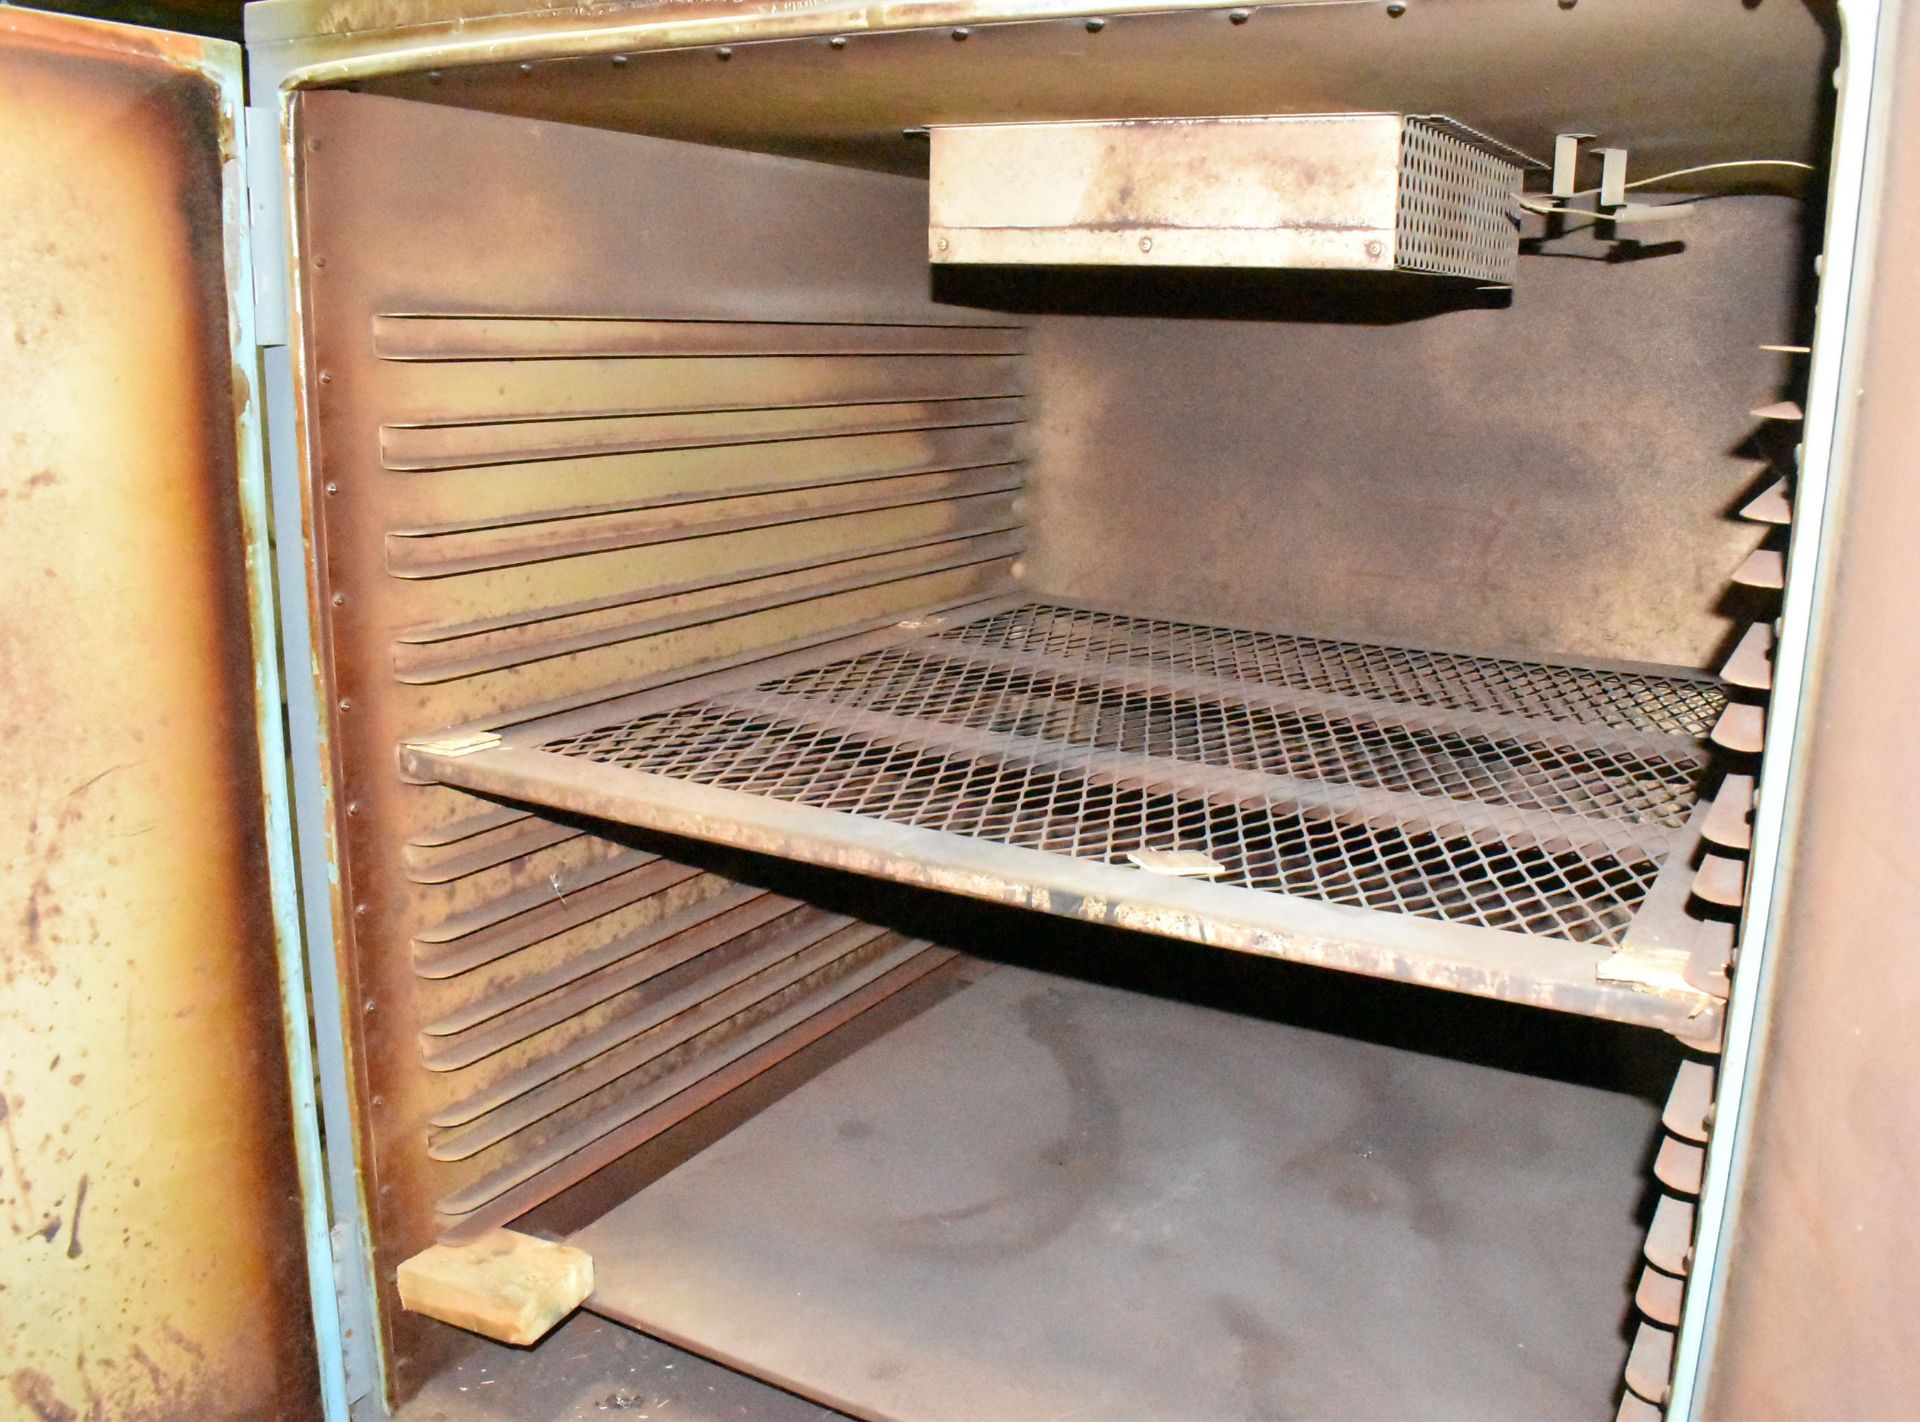 GRIEVE MODEL 333 LARGE CAPACITY ELECTRIC BENCH OVEN WITH 350 DEG. F. MAX. TEMPERATURE, 6.6 KW, 36" - Image 5 of 6